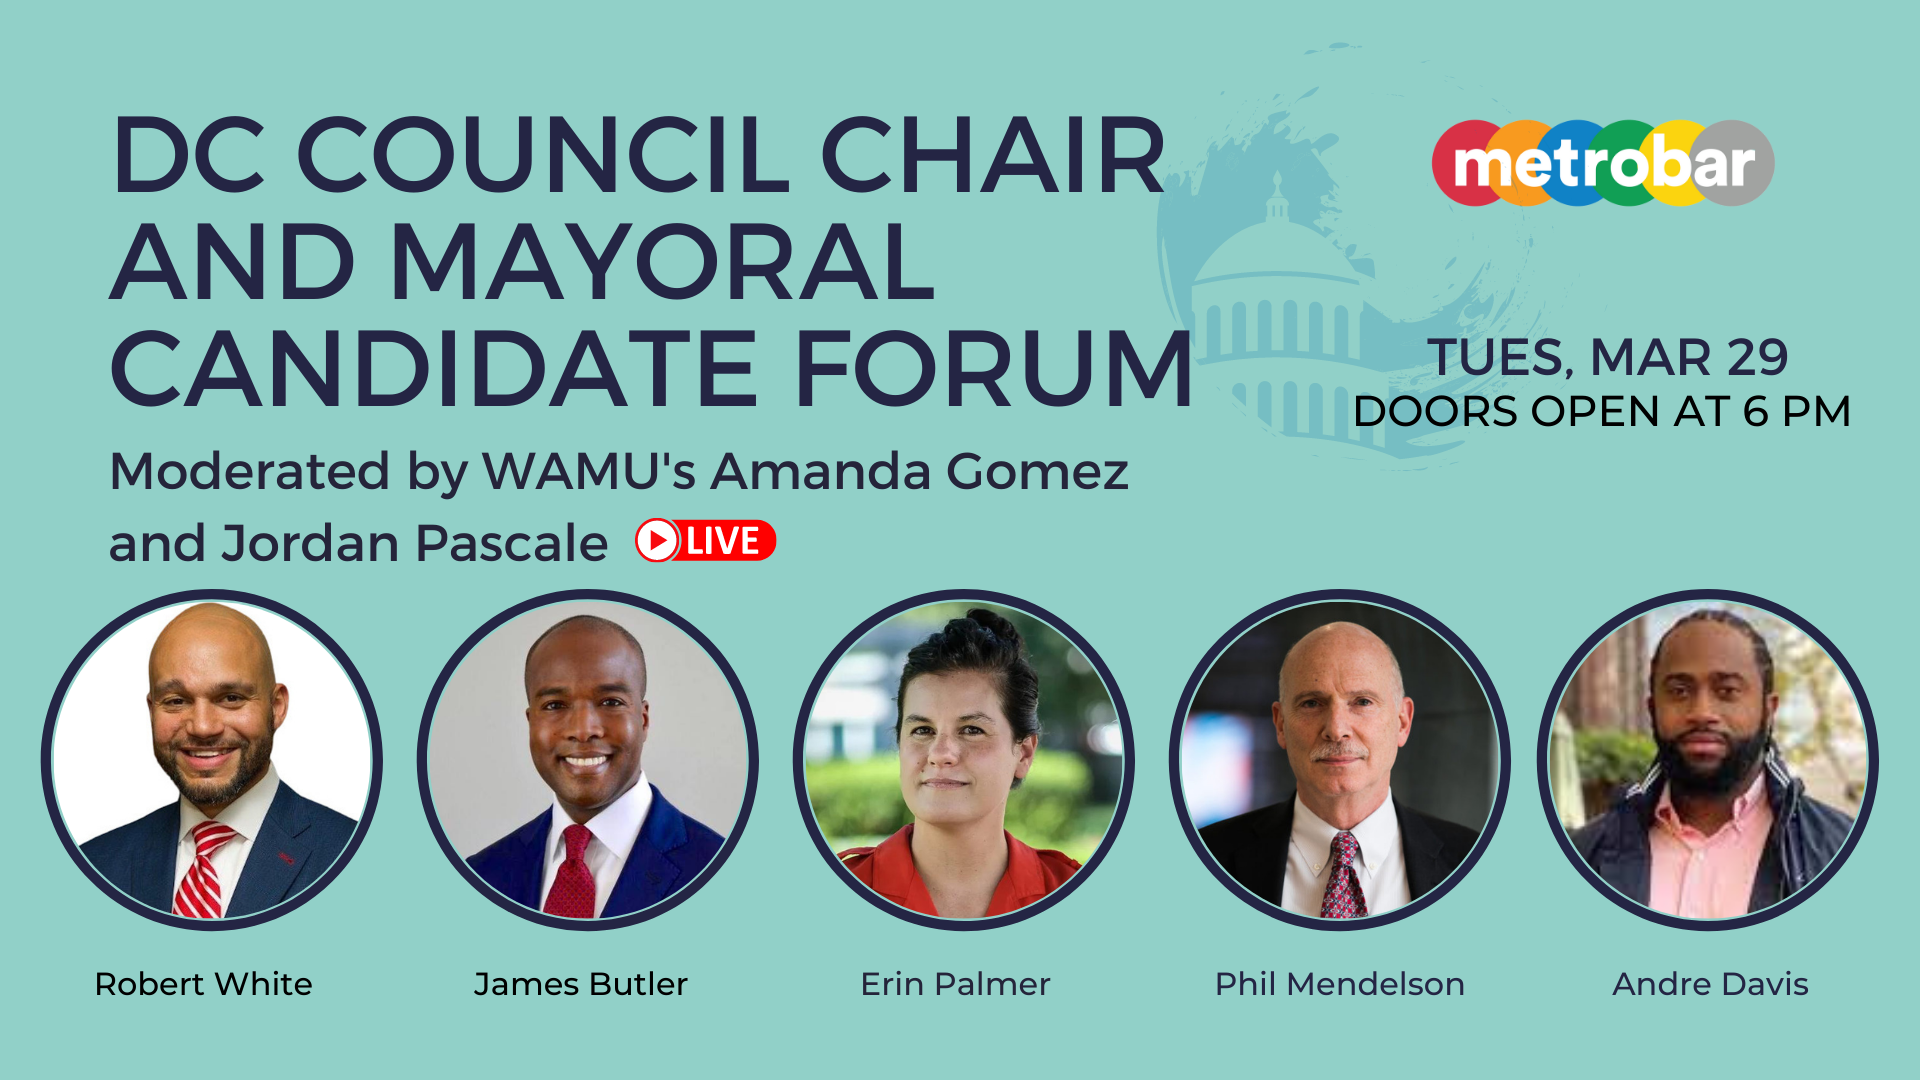 DC Council Chair and Mayoral Candidate Forum